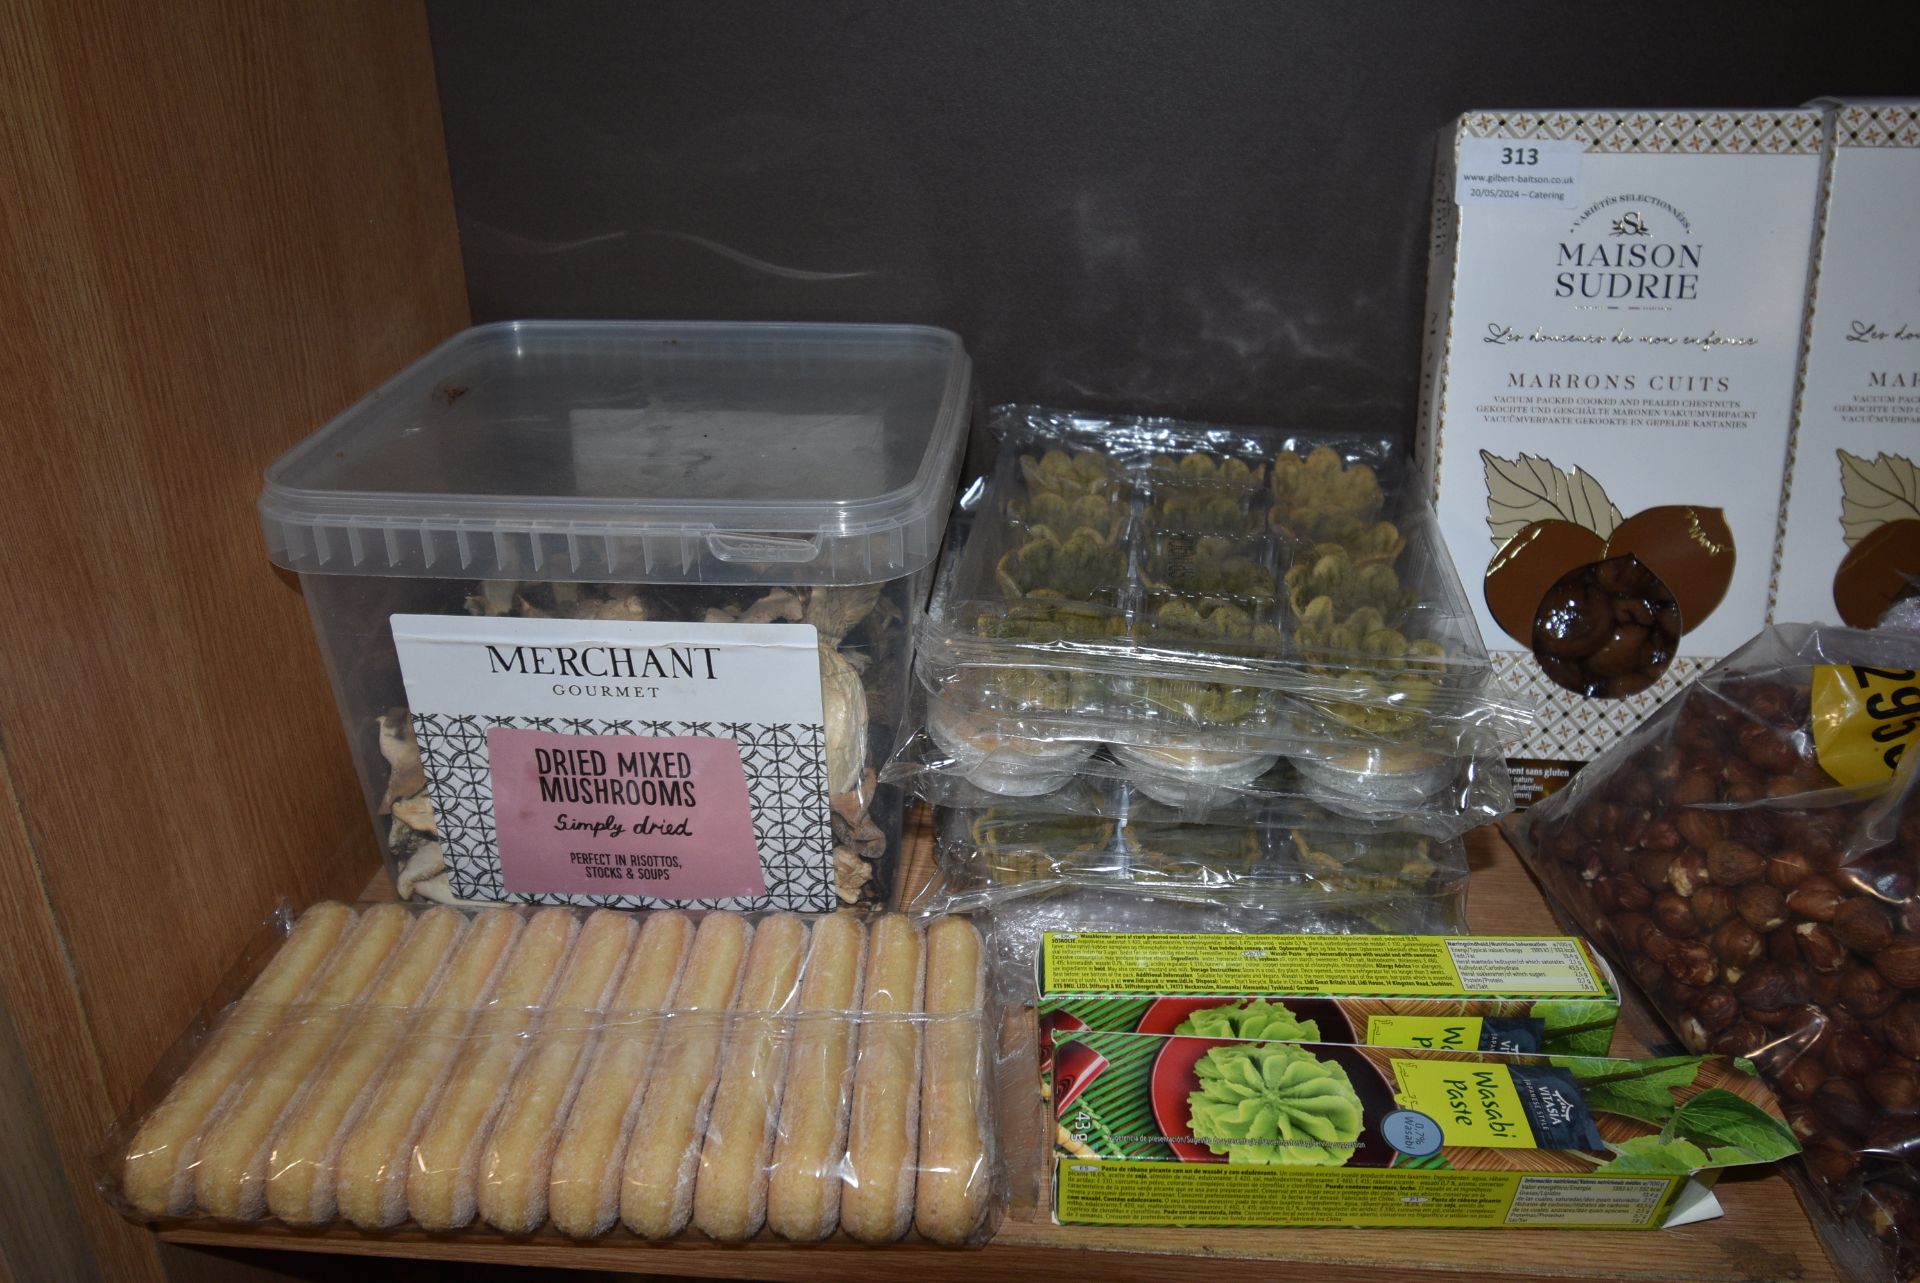 Contents of Shelf to Include Salted Nuts, Dried Mushrooms, Wasabi Paste, etc. - Image 2 of 4